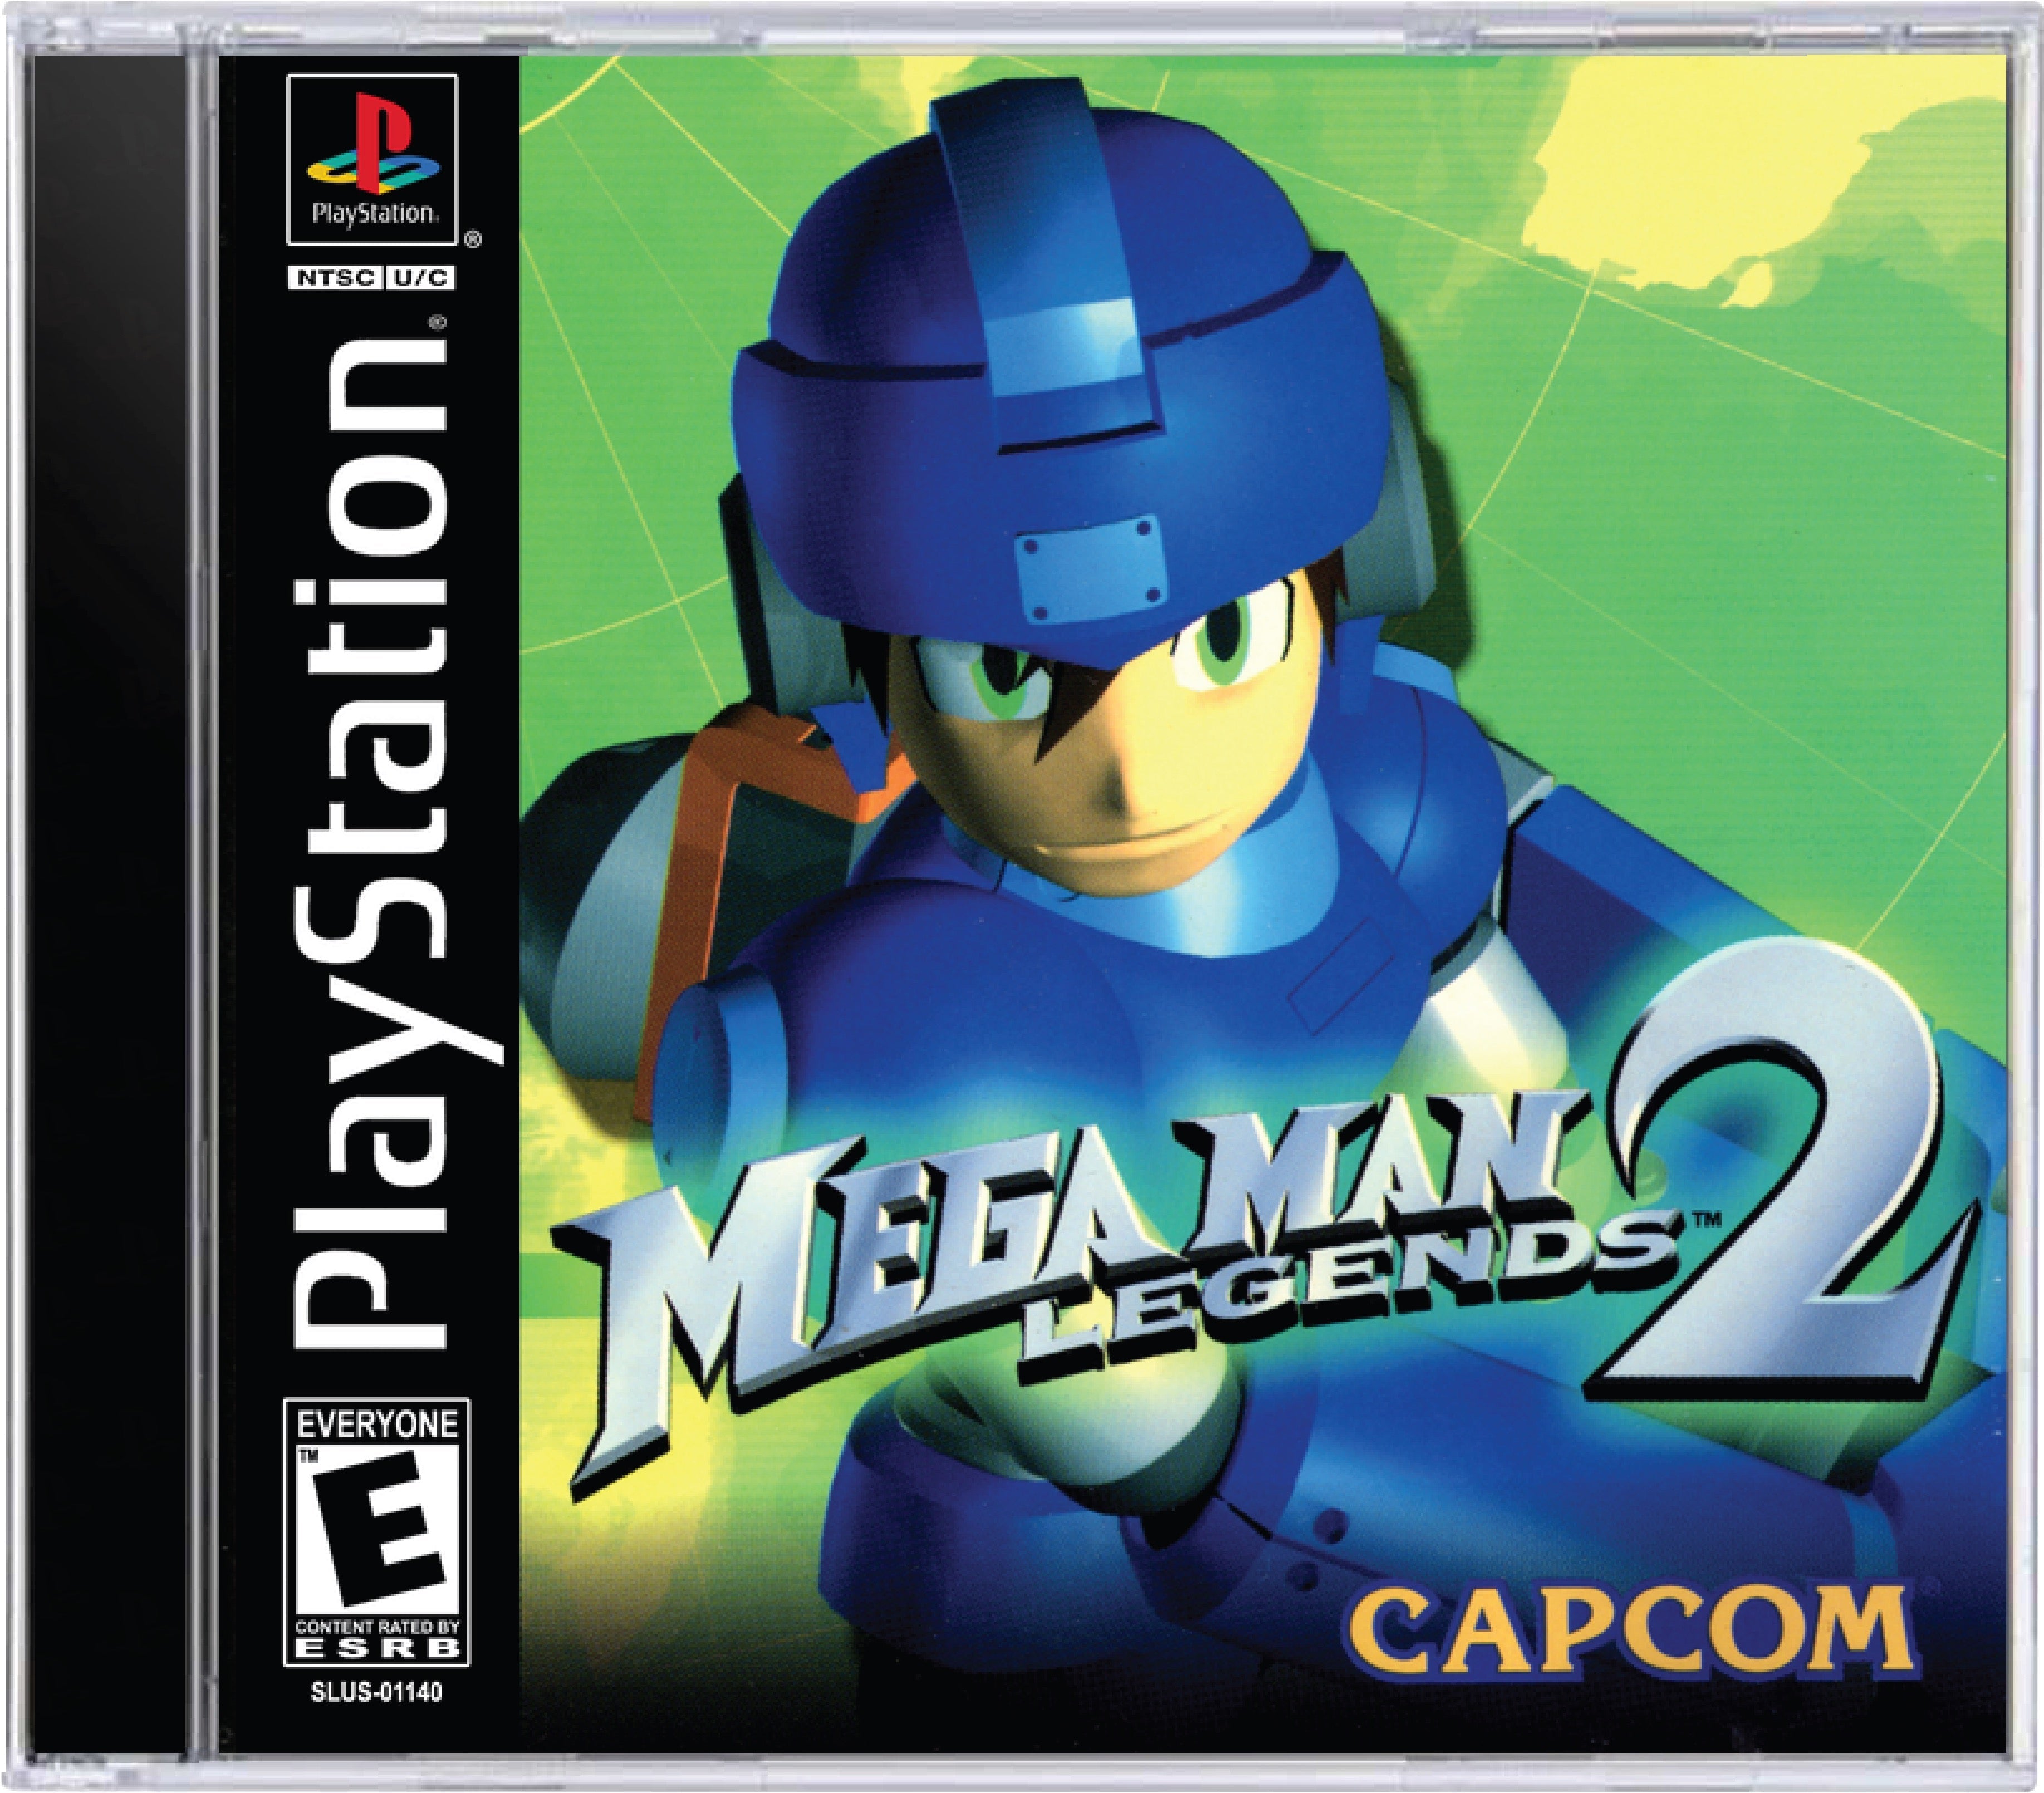 Mega Man Legends 2 Cover Art and Product Photo